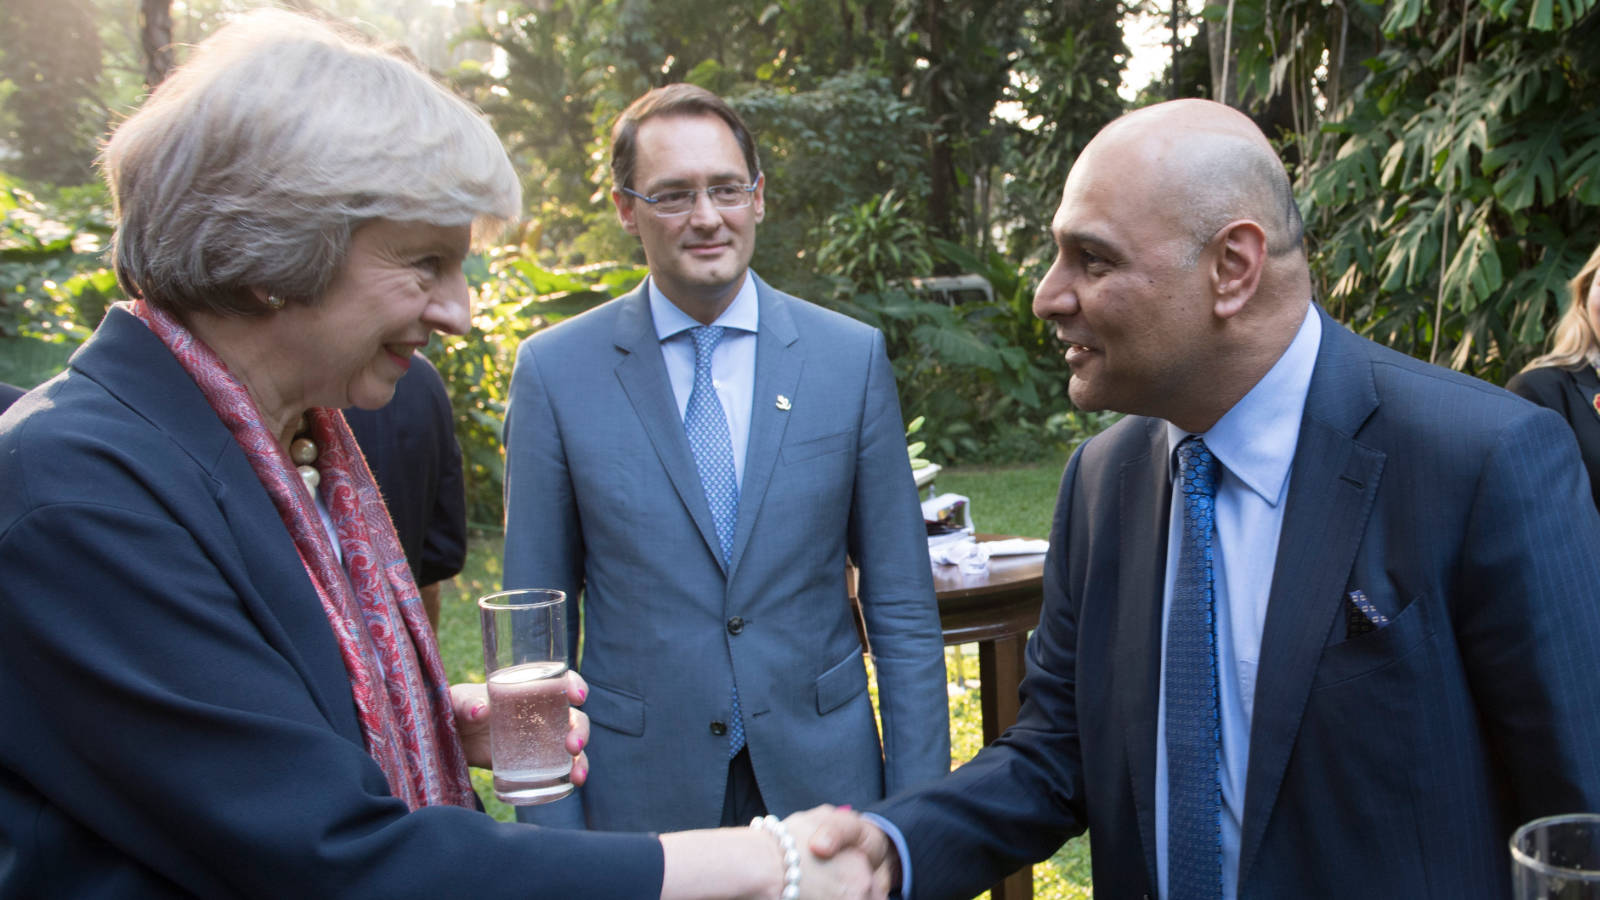 Dr Nik Kotecha OBE, Chief Executive of Morningside Pharmaceuticals, with UK Prime Minister Theresa May.